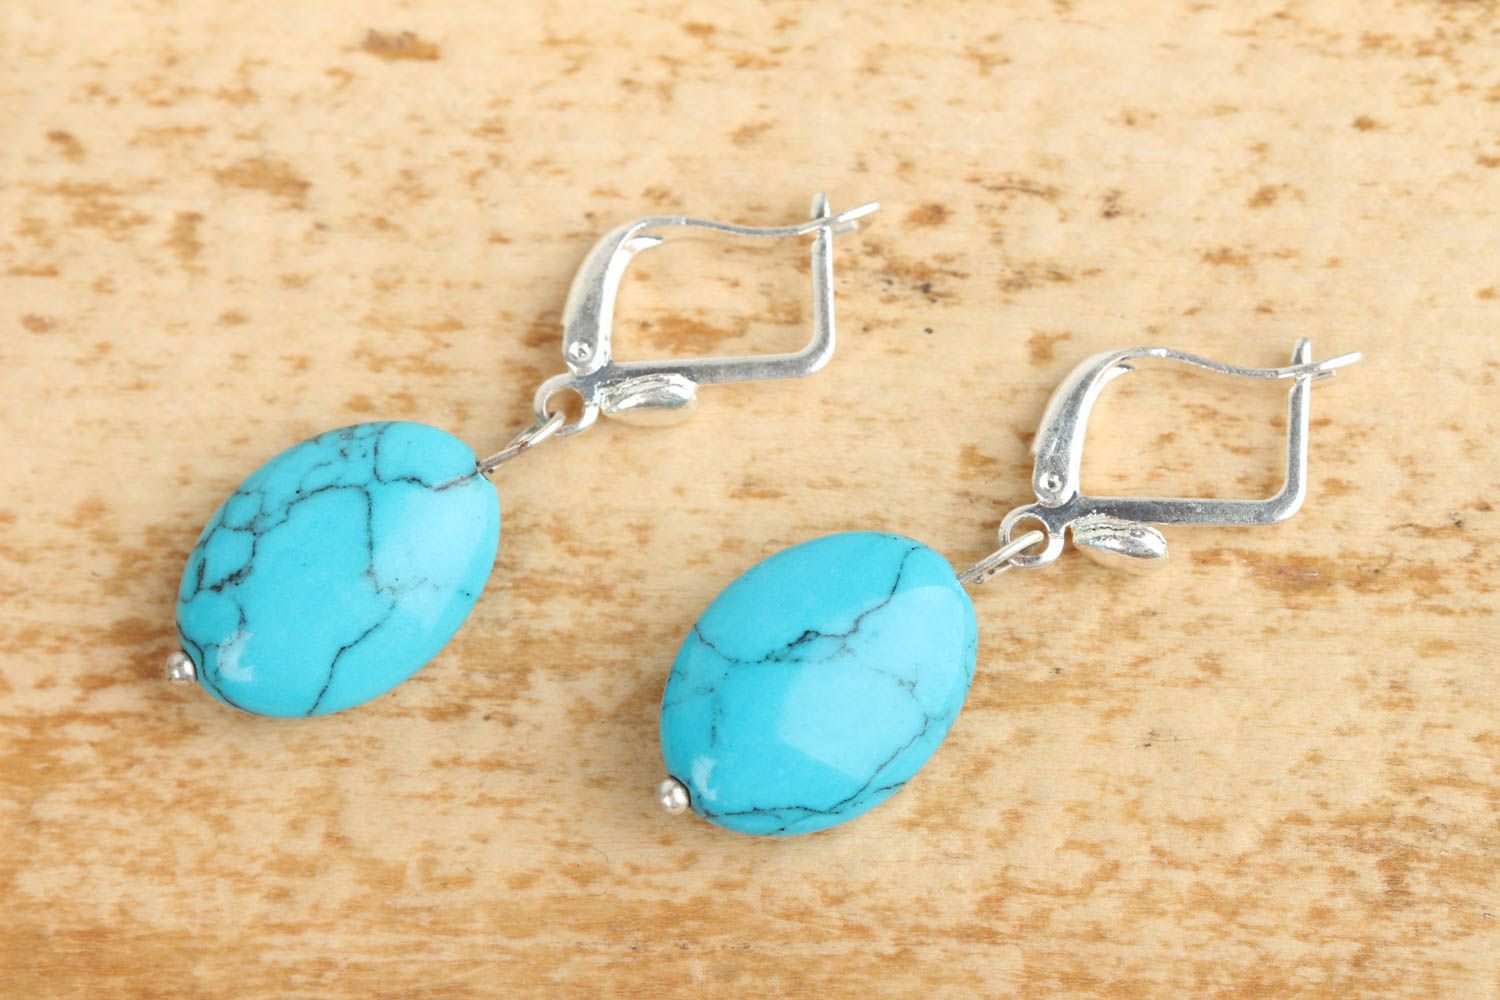 Turquoise earrings handmade earrings with natural stones fashion jewelry photo 1